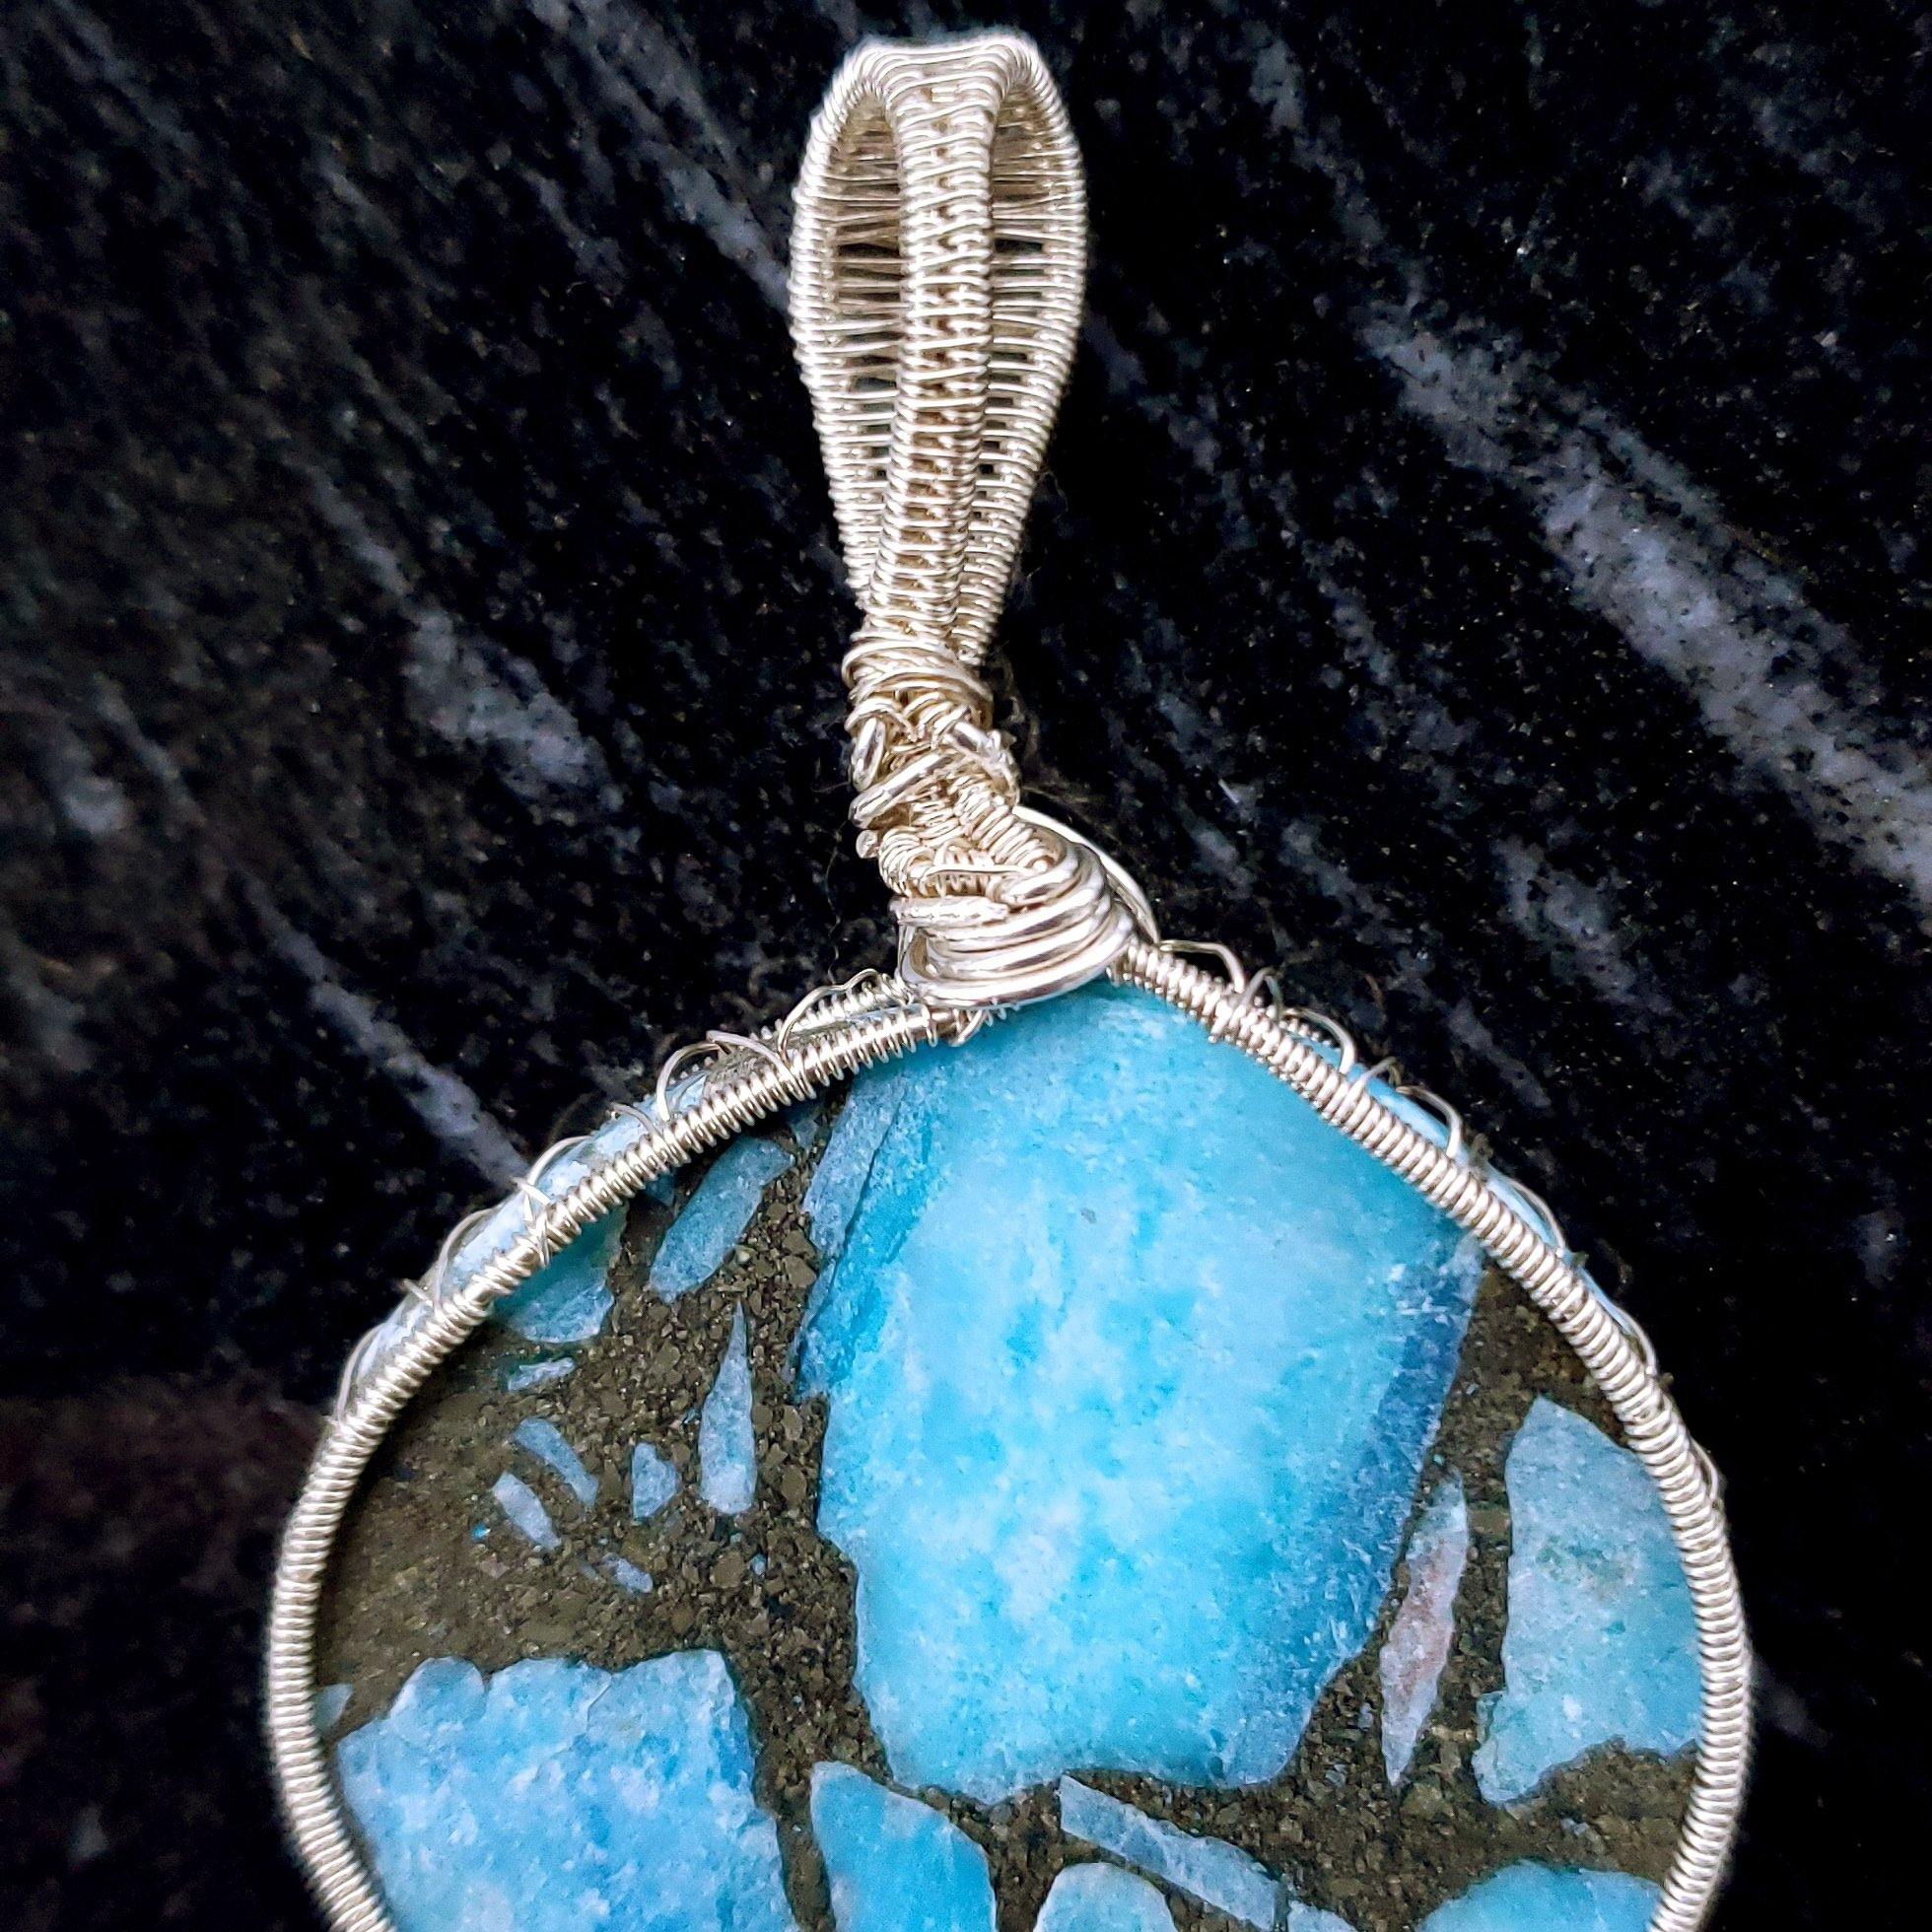 Laguna Collection - Beautiful Blue Turquoise and Pyrite Pendant weaved in Sterling Silver close-up view of the weaving detail - BellaChel Jeweler